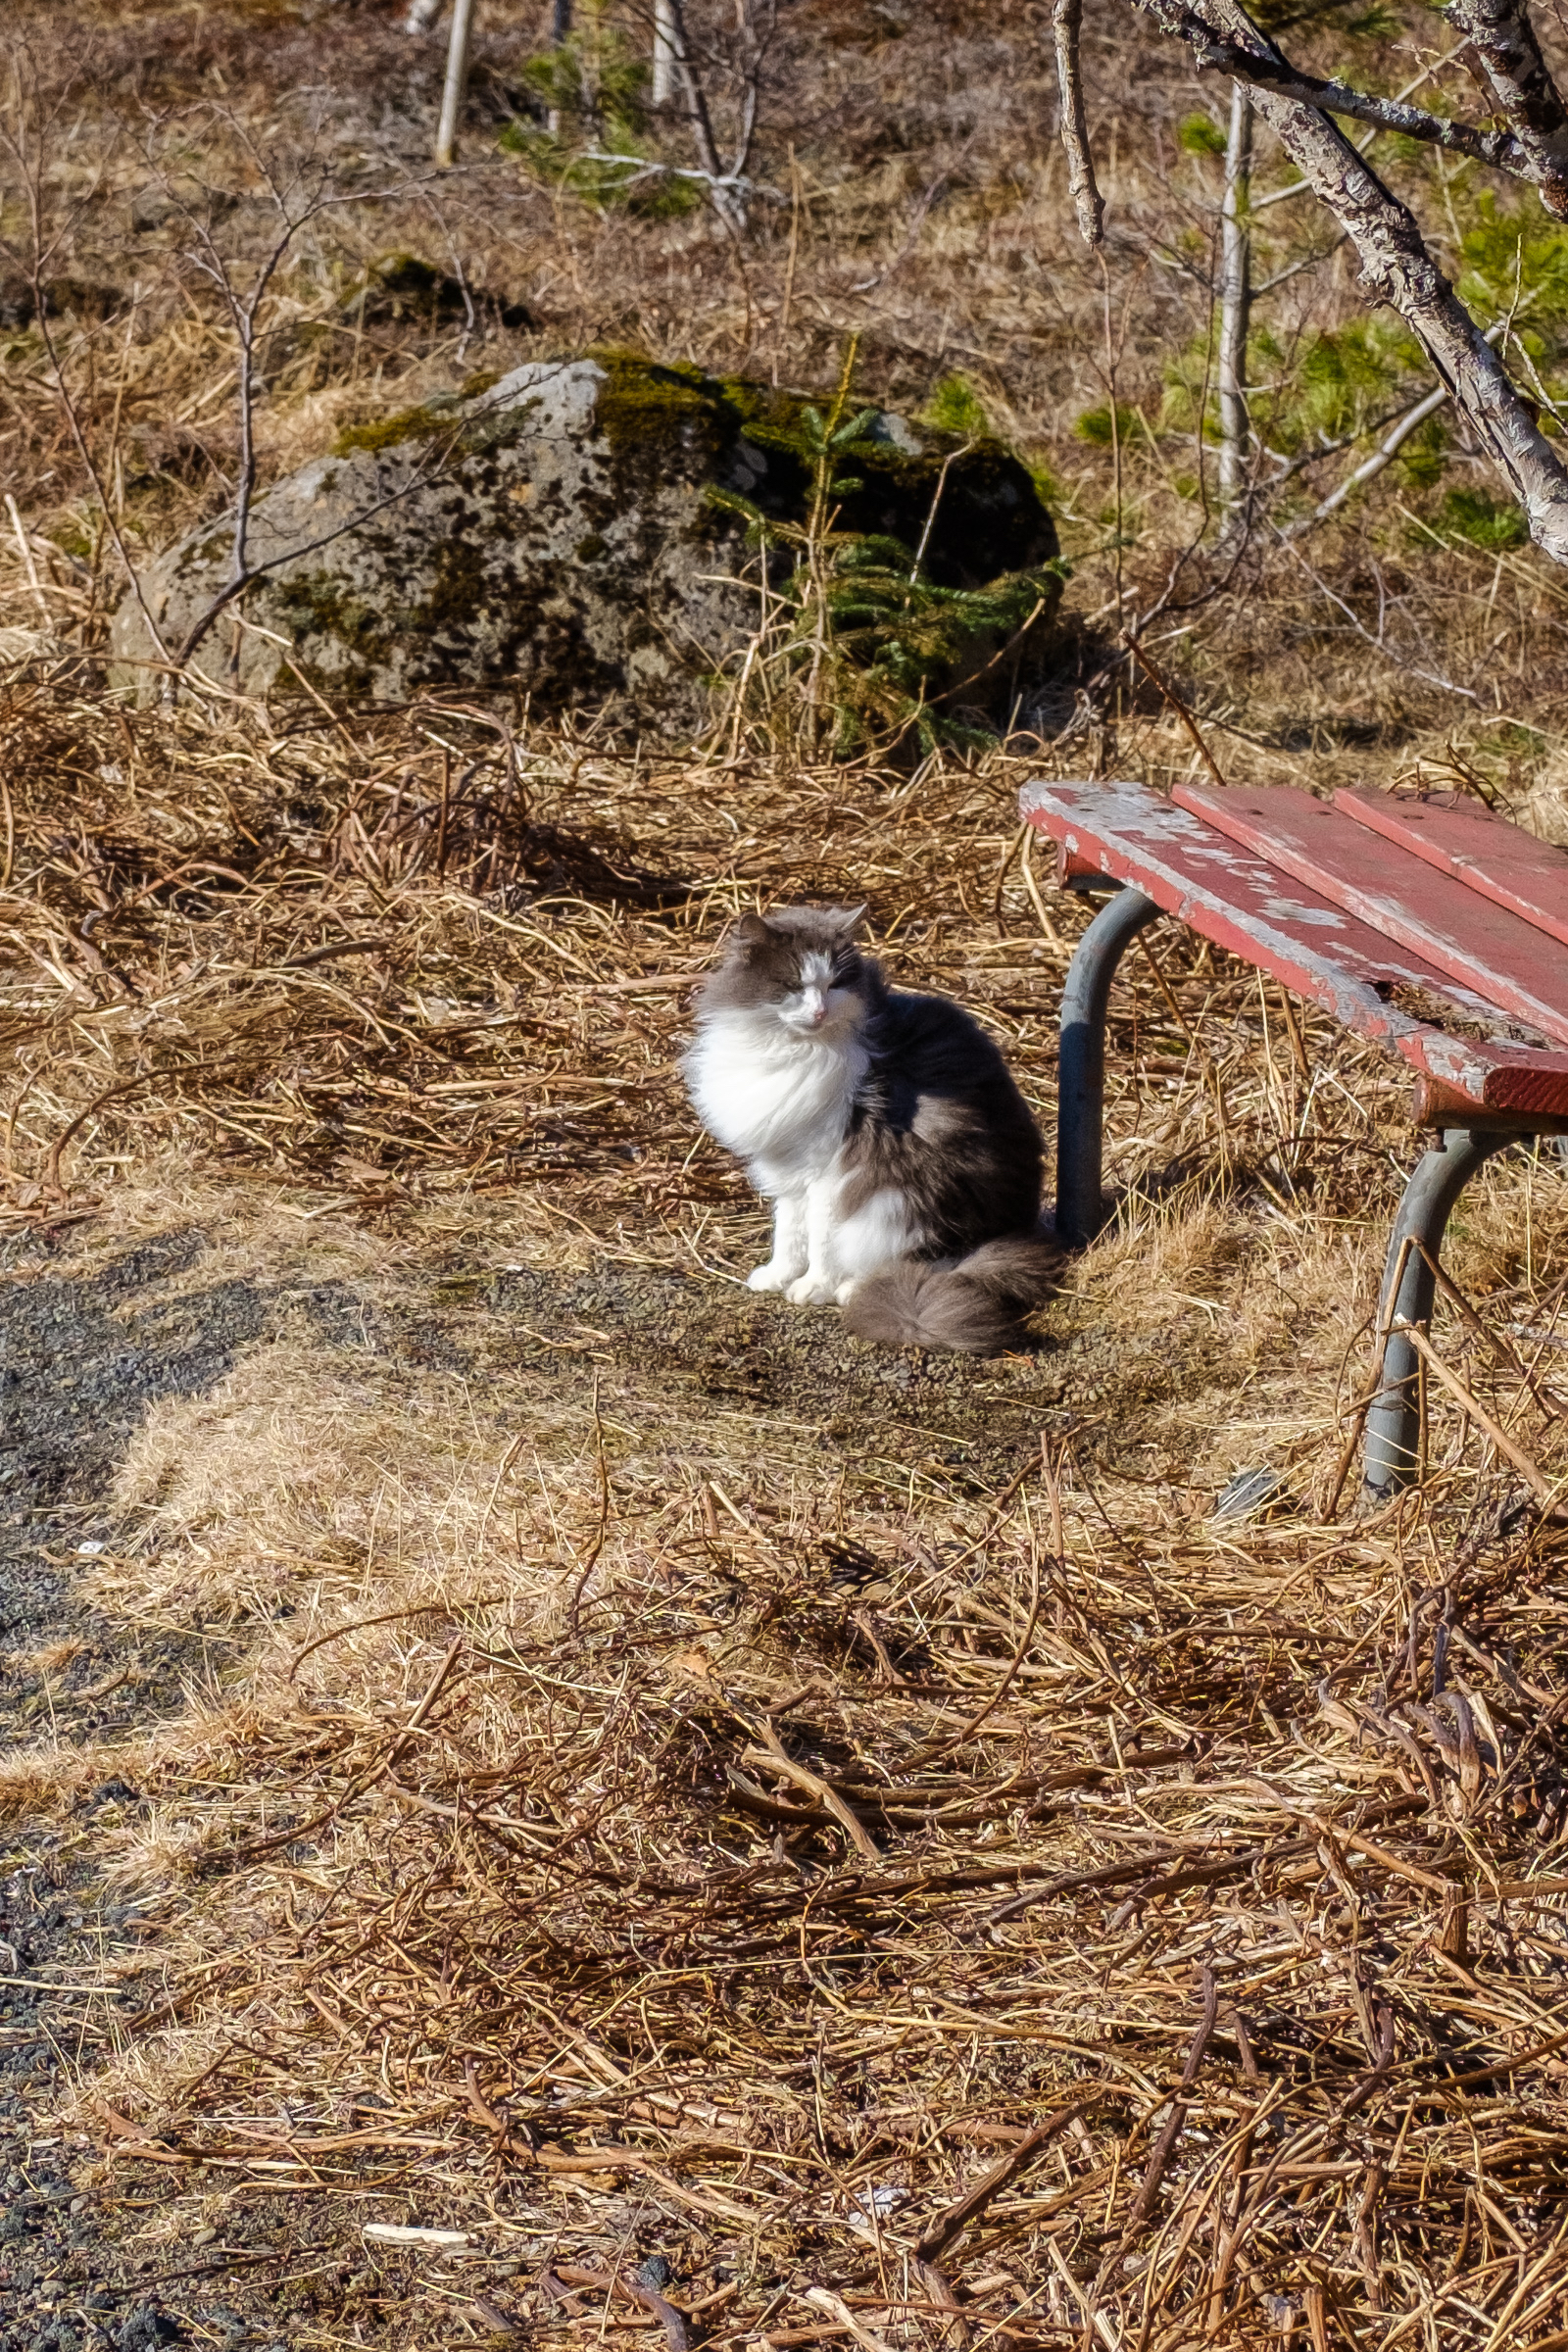 Same long-haired grey and white, tuxedo-patterned cat. This time a bit further away. We can see more of the bench.